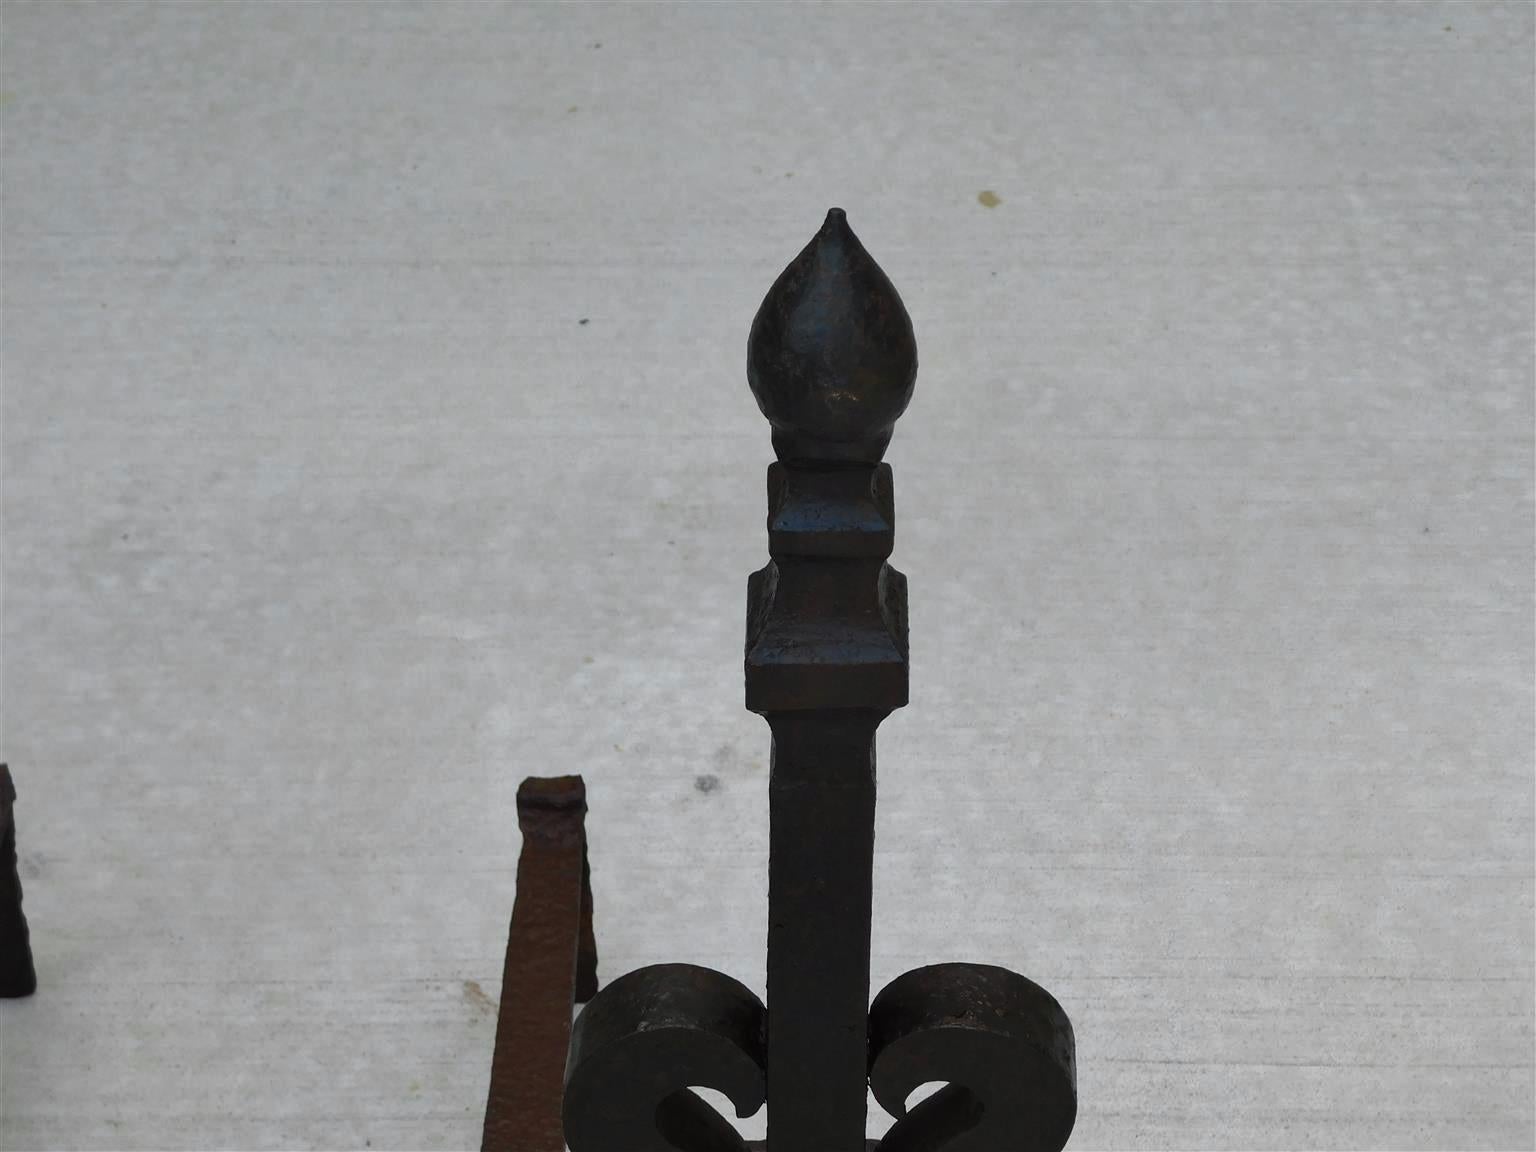 American Wrought Iron Faceted Lemon Finial Andirons w/ Scrolled Plinths, C. 1820 For Sale 3